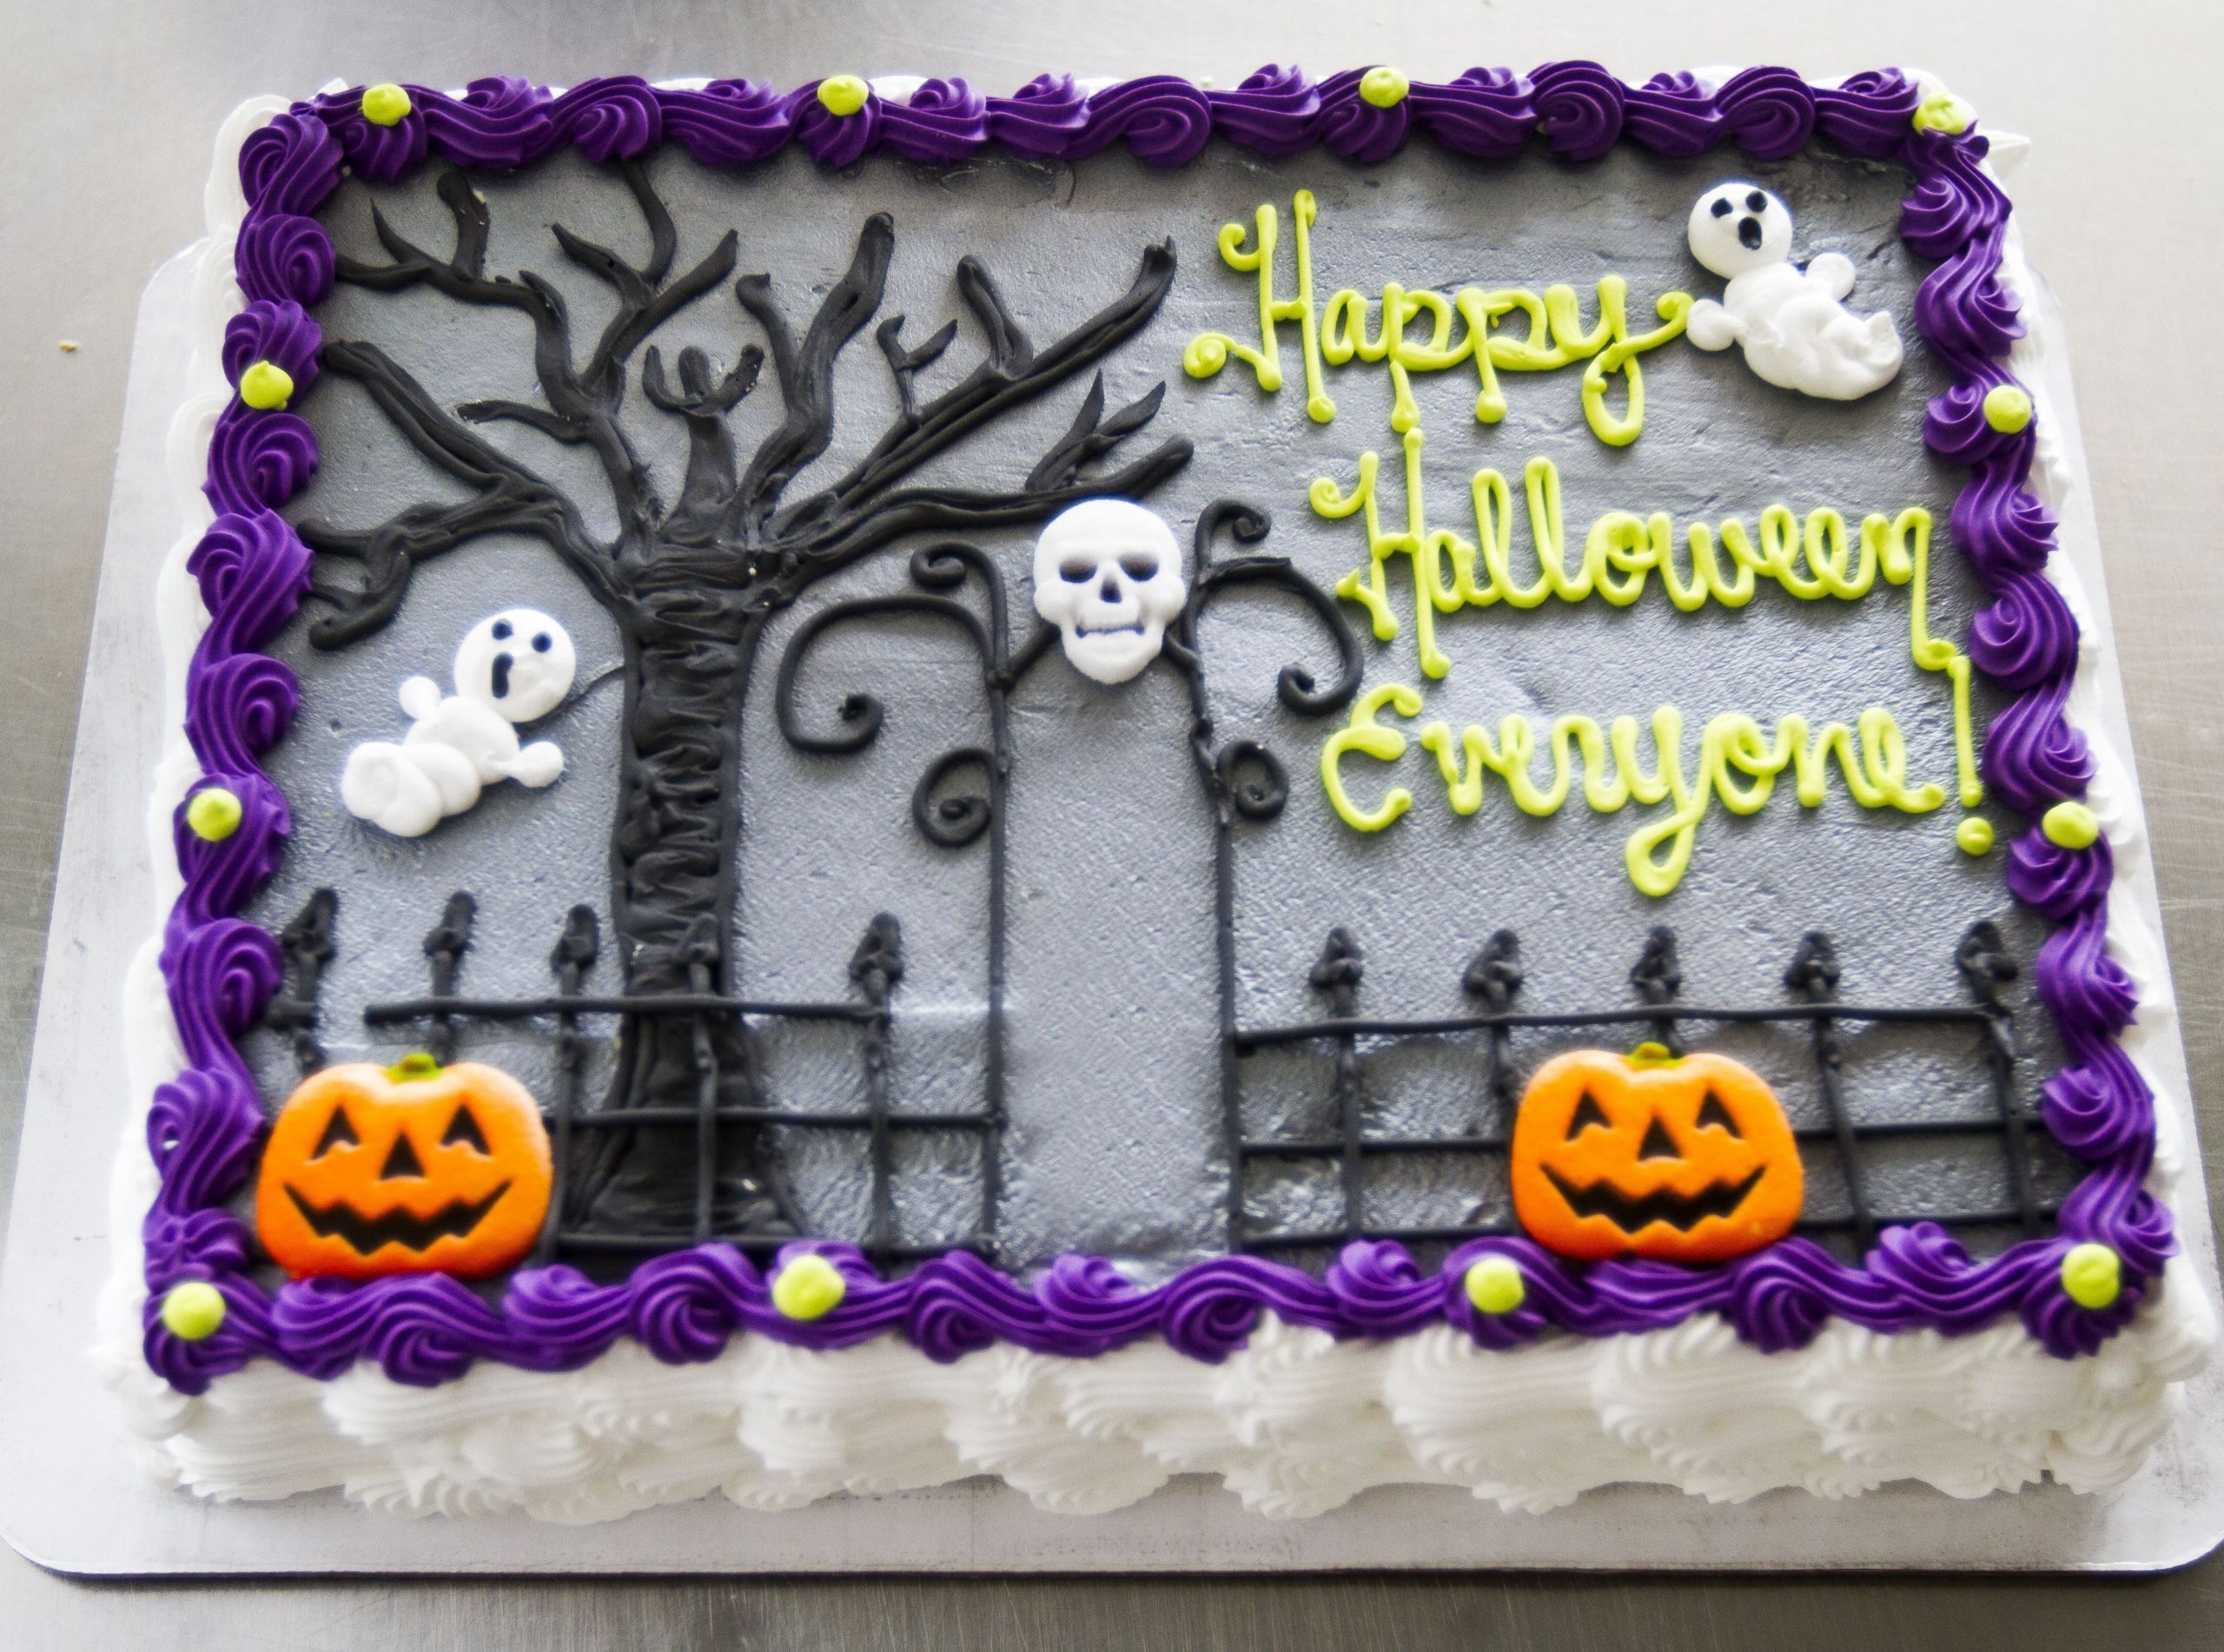 Halloween Sheet Cakes
 A graveyard cake with ghosts for Halloween Cake 028